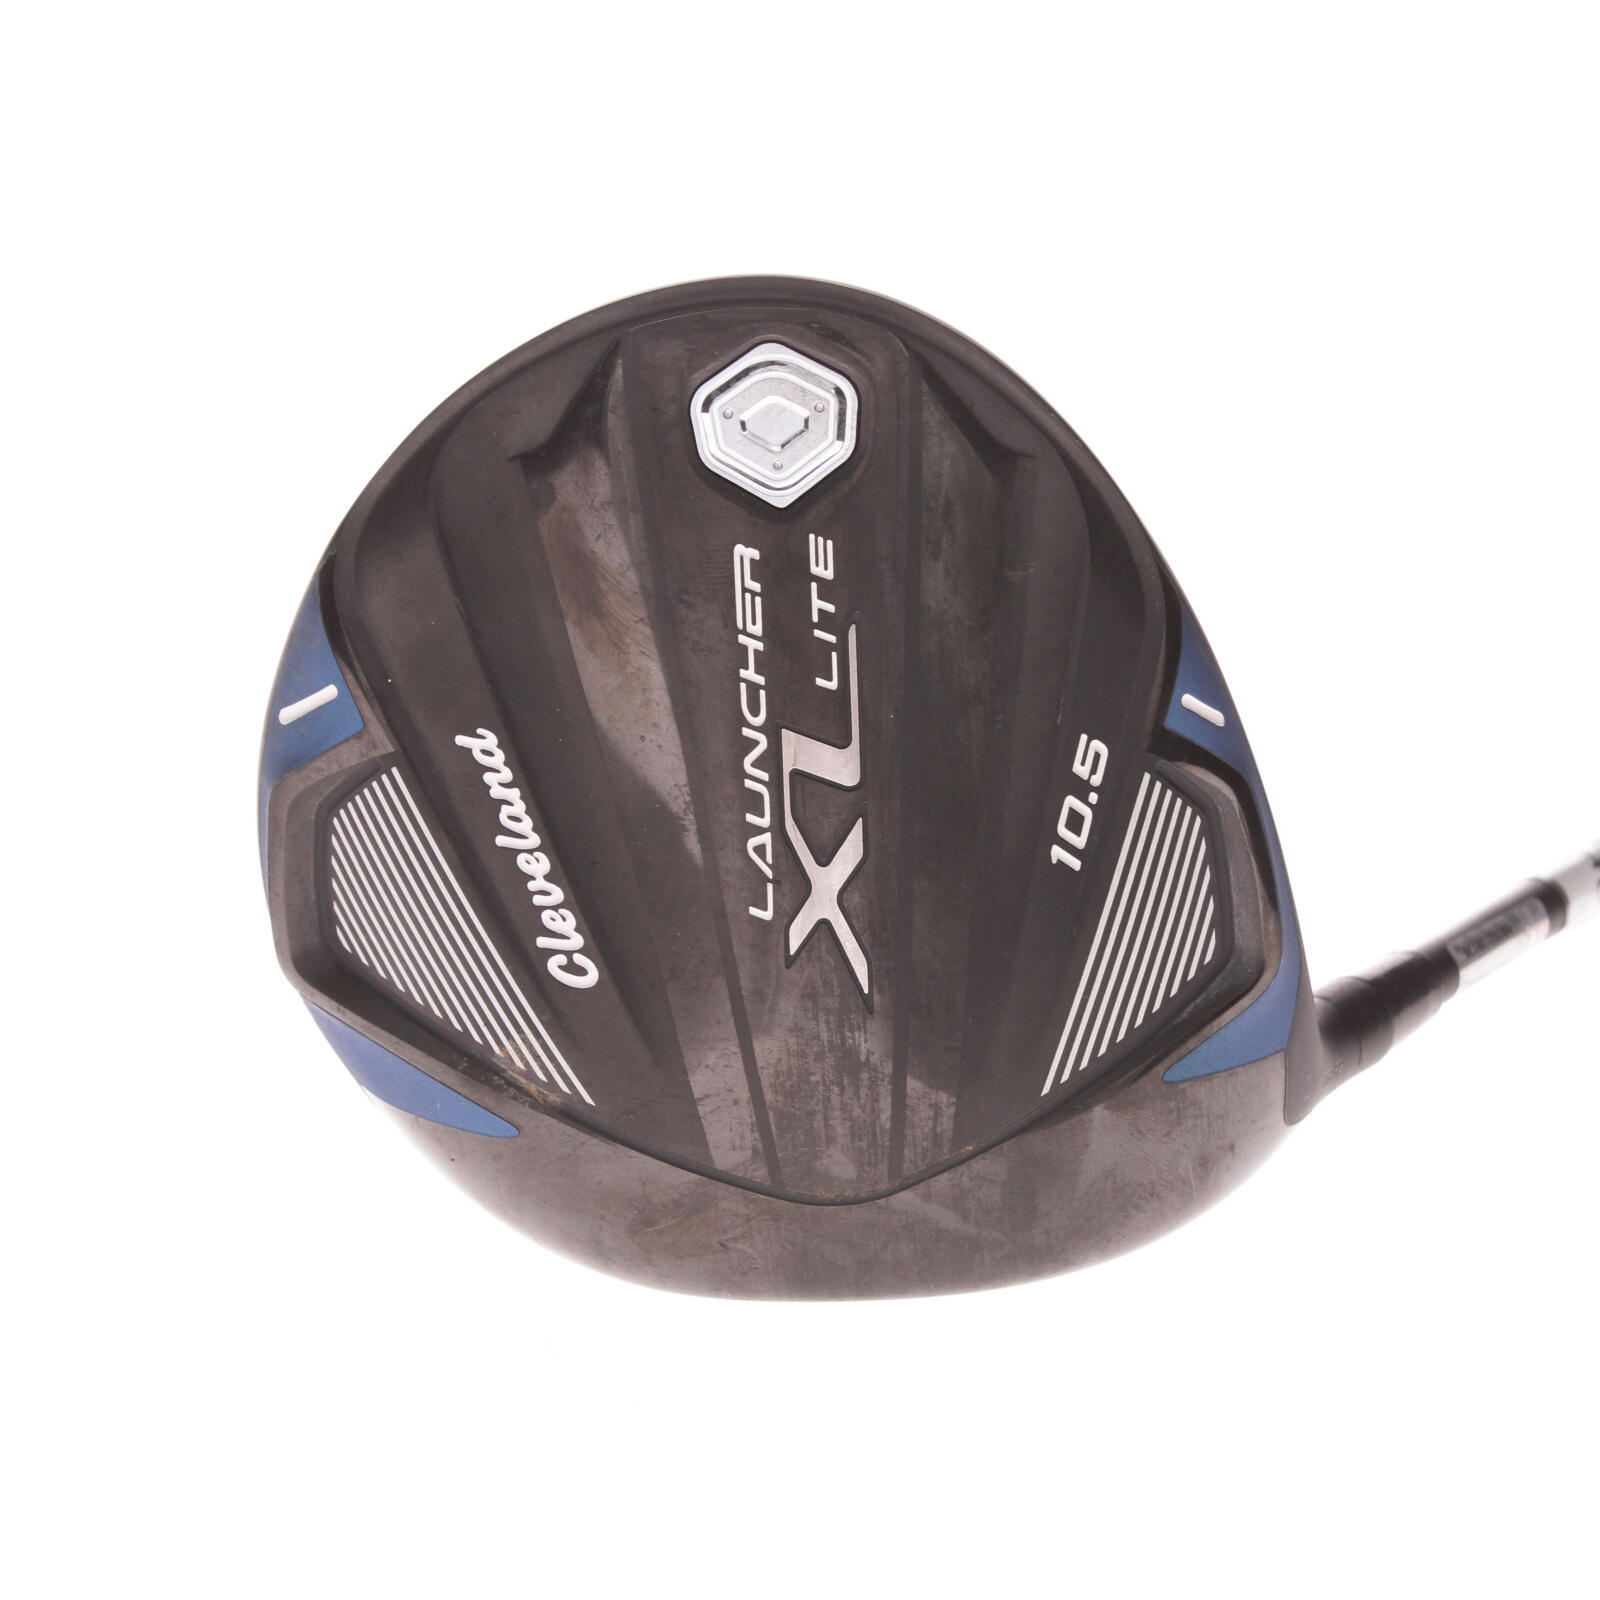 USED -  Driver Cleveland Launcher XL Lite 10.5* Graphite Left Handed - GRADE B 1/5